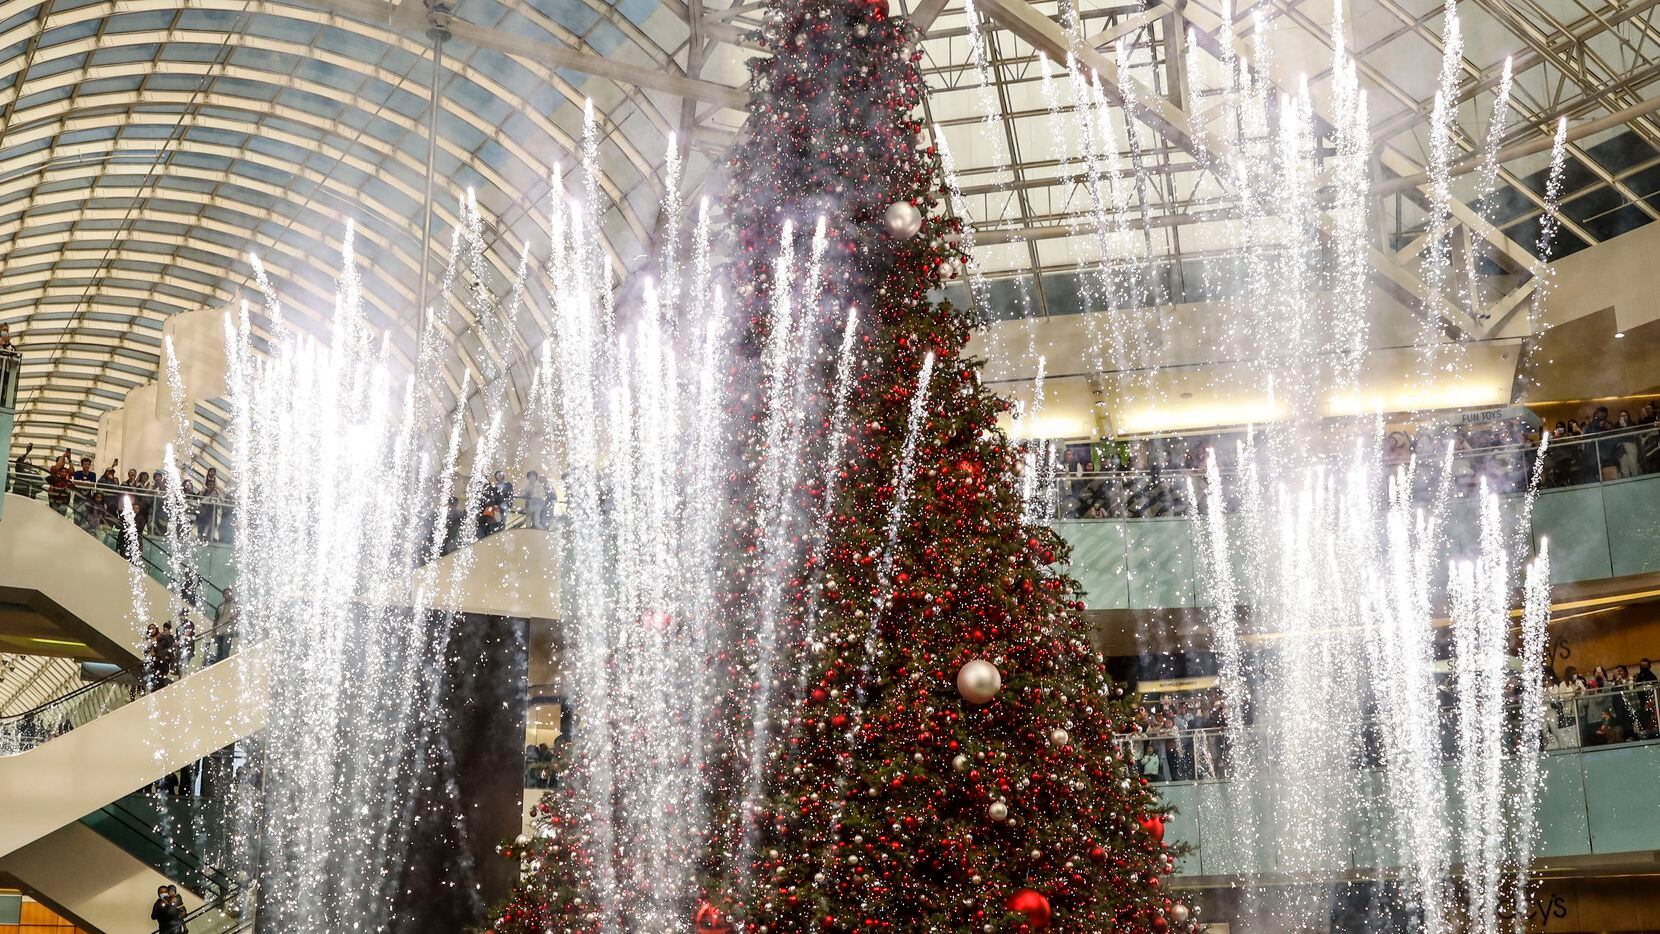 The indoor Christmas tree gets lit during Black Friday at Galleria Dallas. The 95-foot tall tree is among the attractions "Condé Nast Traveler" says make Dallas a place to visit this holiday season.